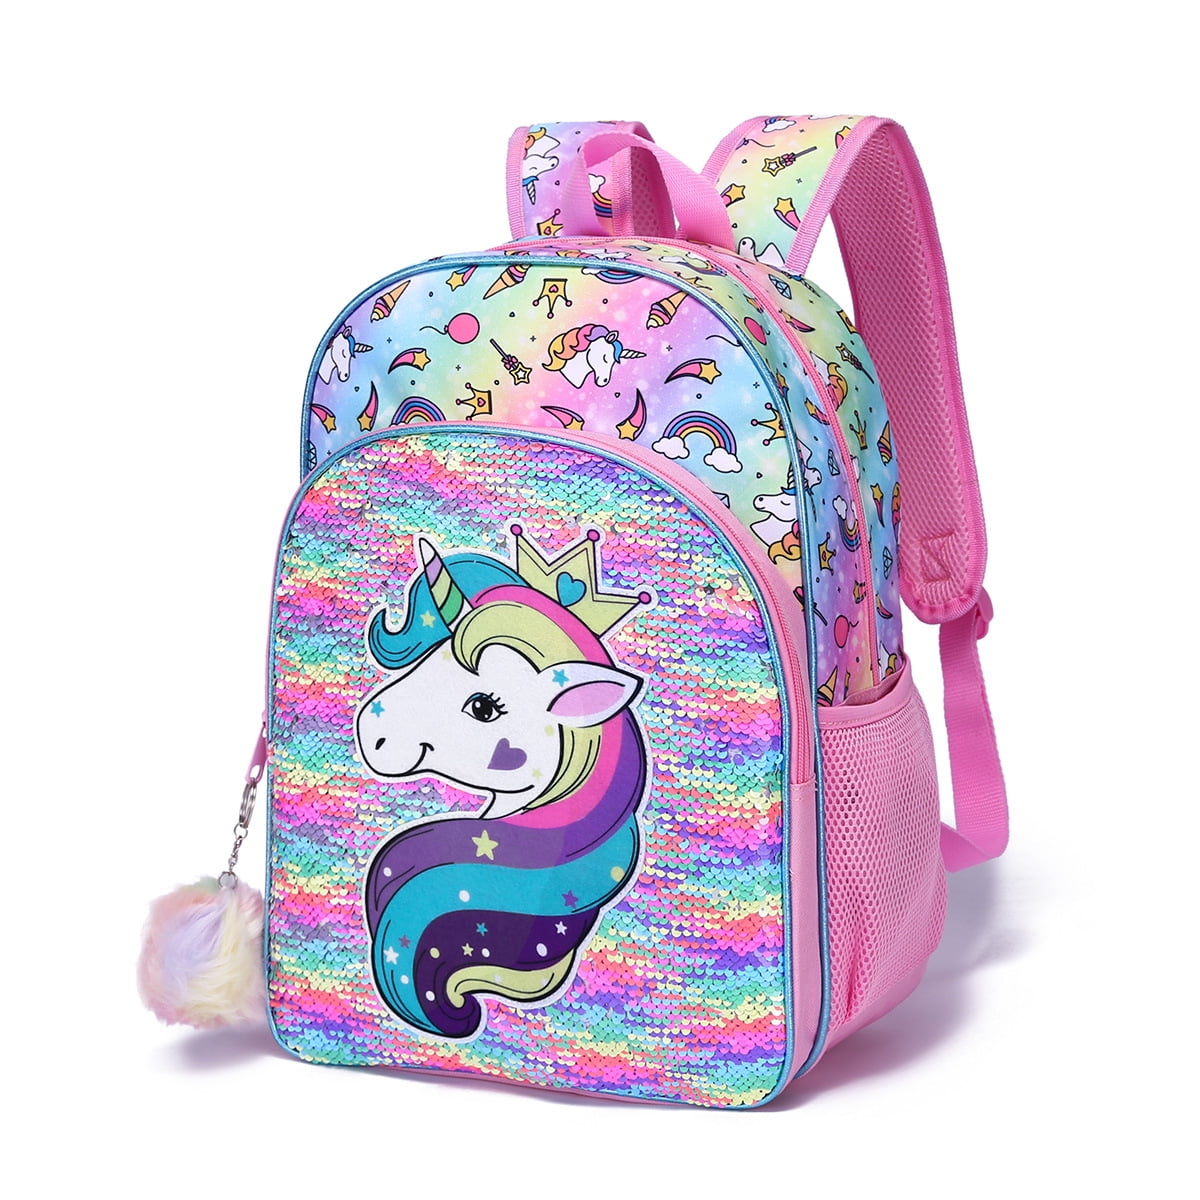 Buy Unicorn School Bag For Girls And Boys - Age Group - 3 To 6 Years -  Multicolor at Amazon.in